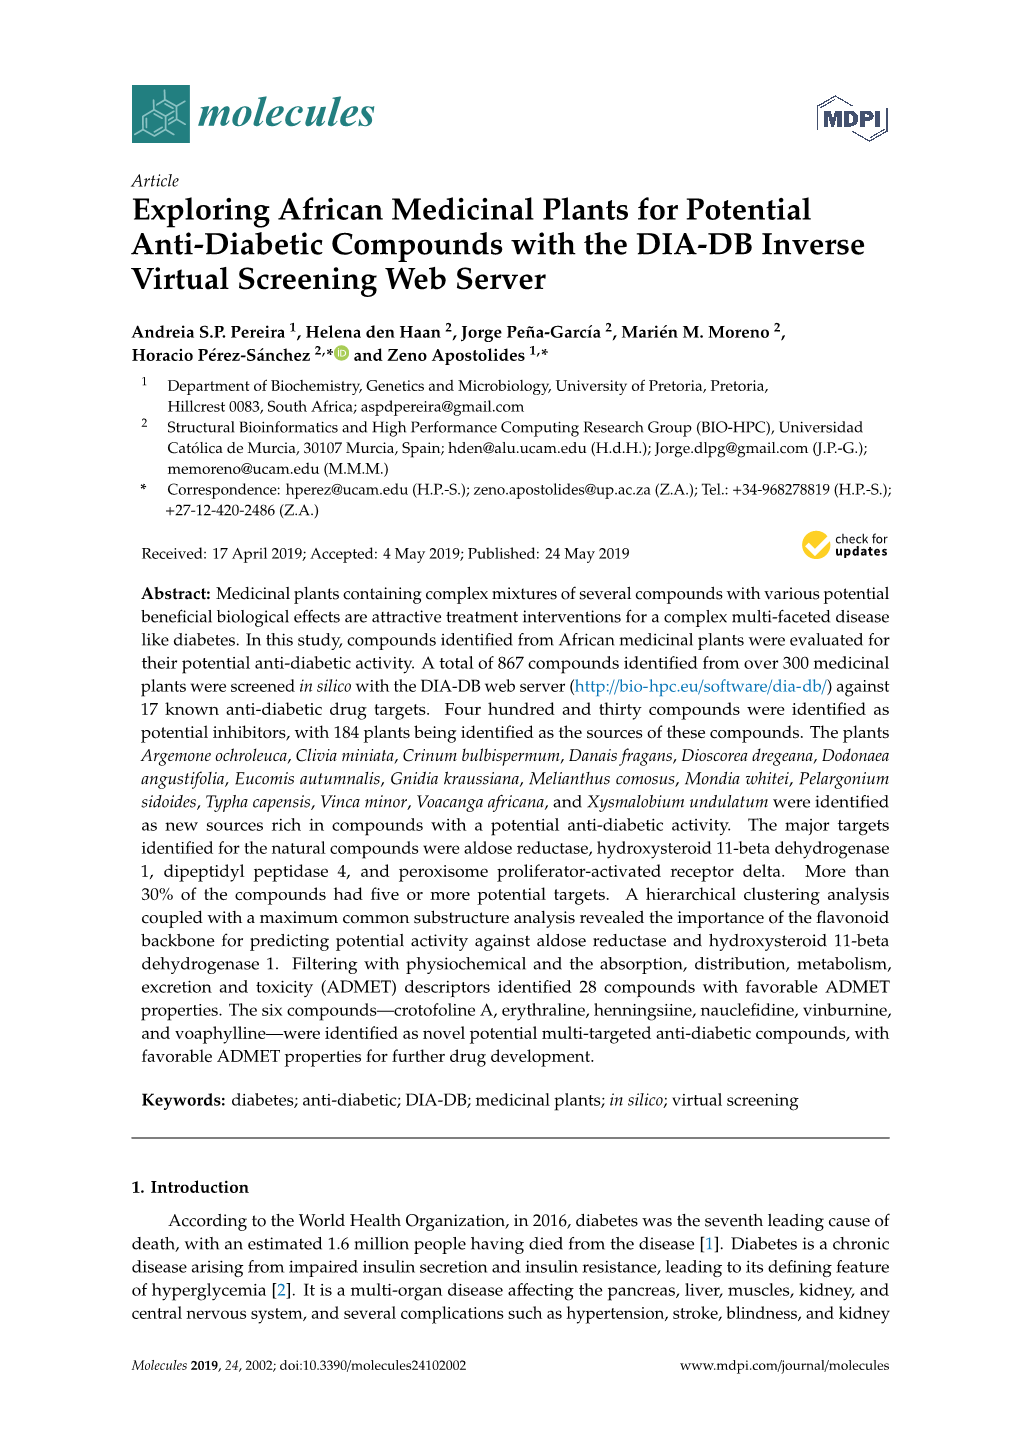 Exploring African Medicinal Plants for Potential Anti-Diabetic Compounds with the DIA-DB Inverse Virtual Screening Web Server